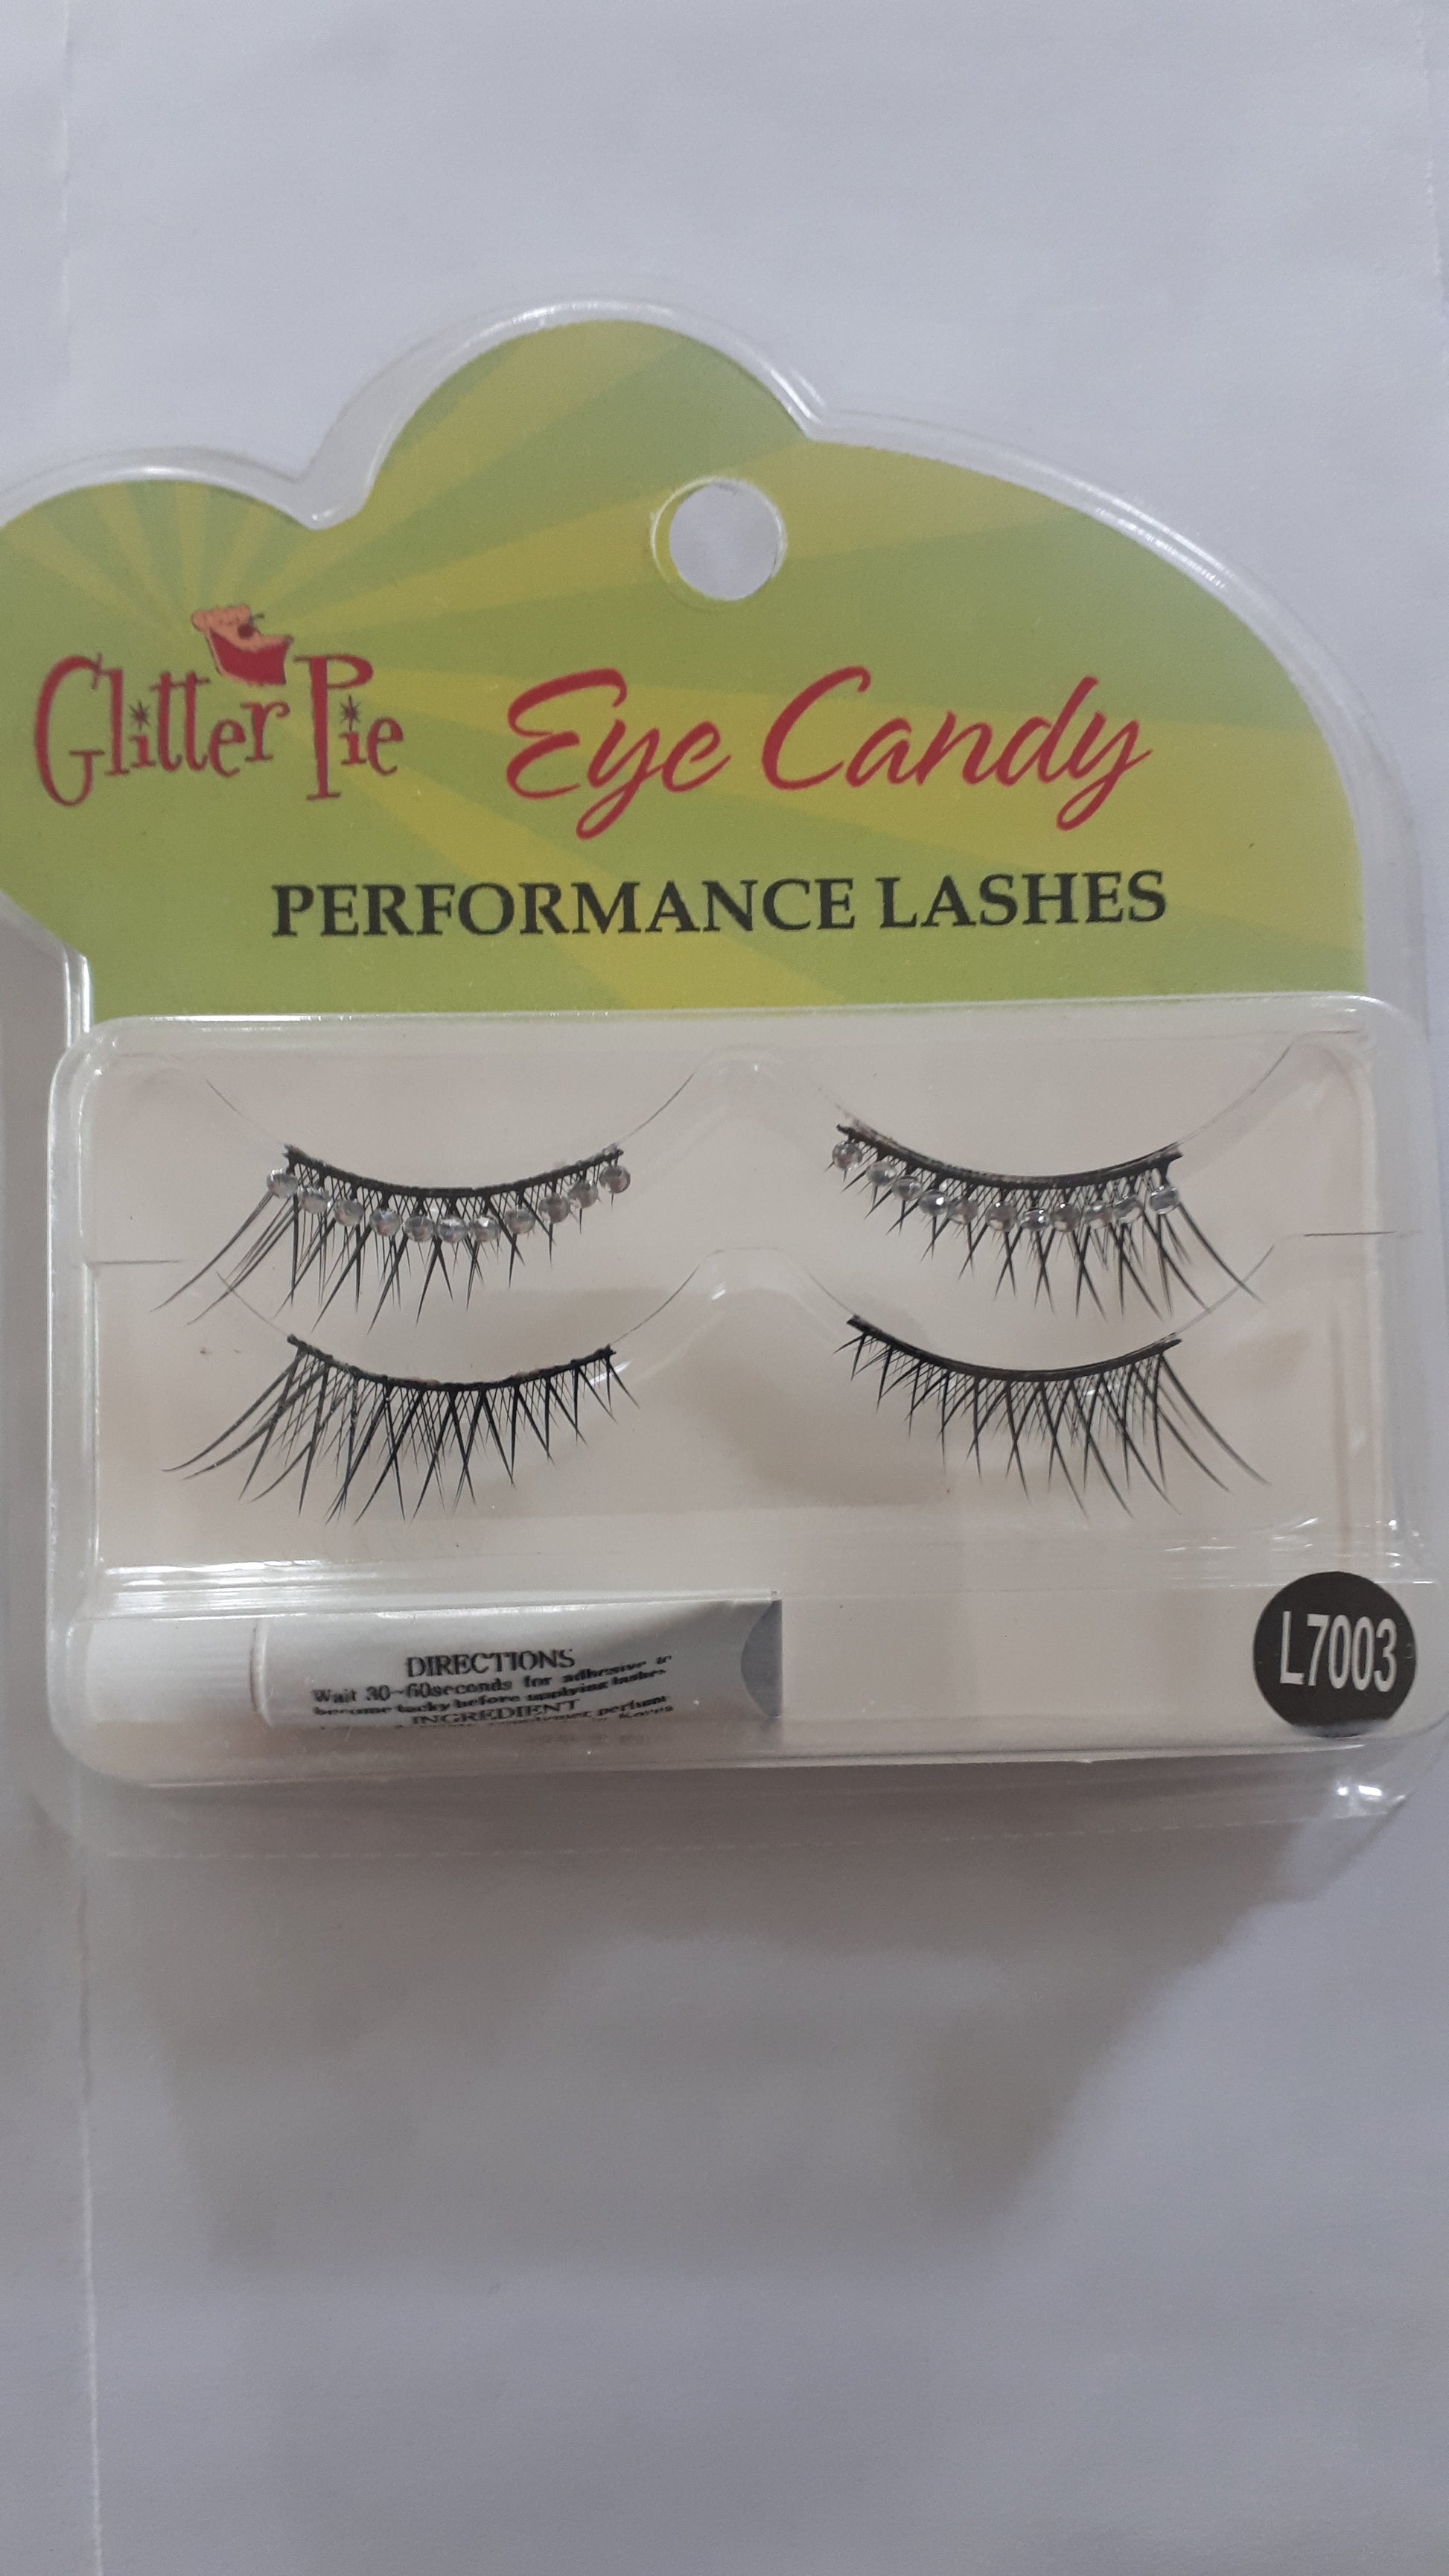 Buy online high quality Glitter Pie Performance Lashes with Glitter - The Movement Boutique - Kelowna